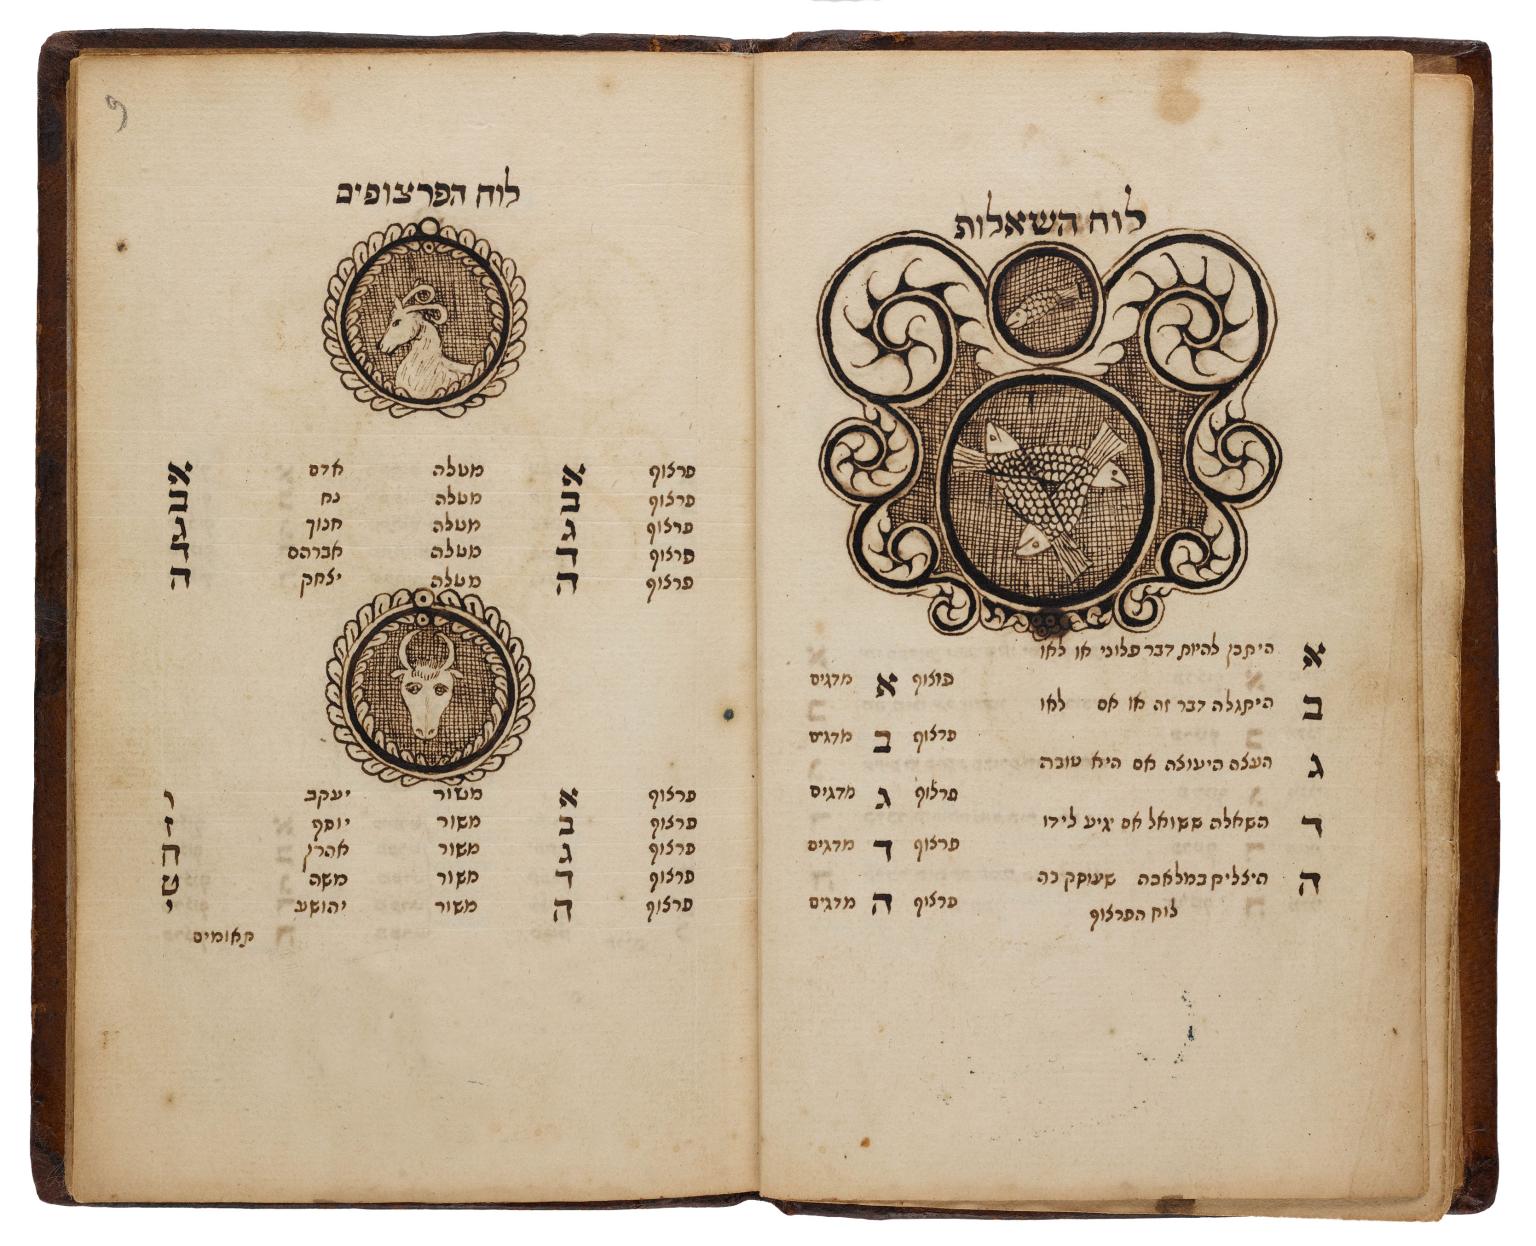 Facing-page manuscript with illustration of fish and spiral design with Hebrew list below on right side, and illustrations of ram's head and bull's head with Hebrew lists below on left page.